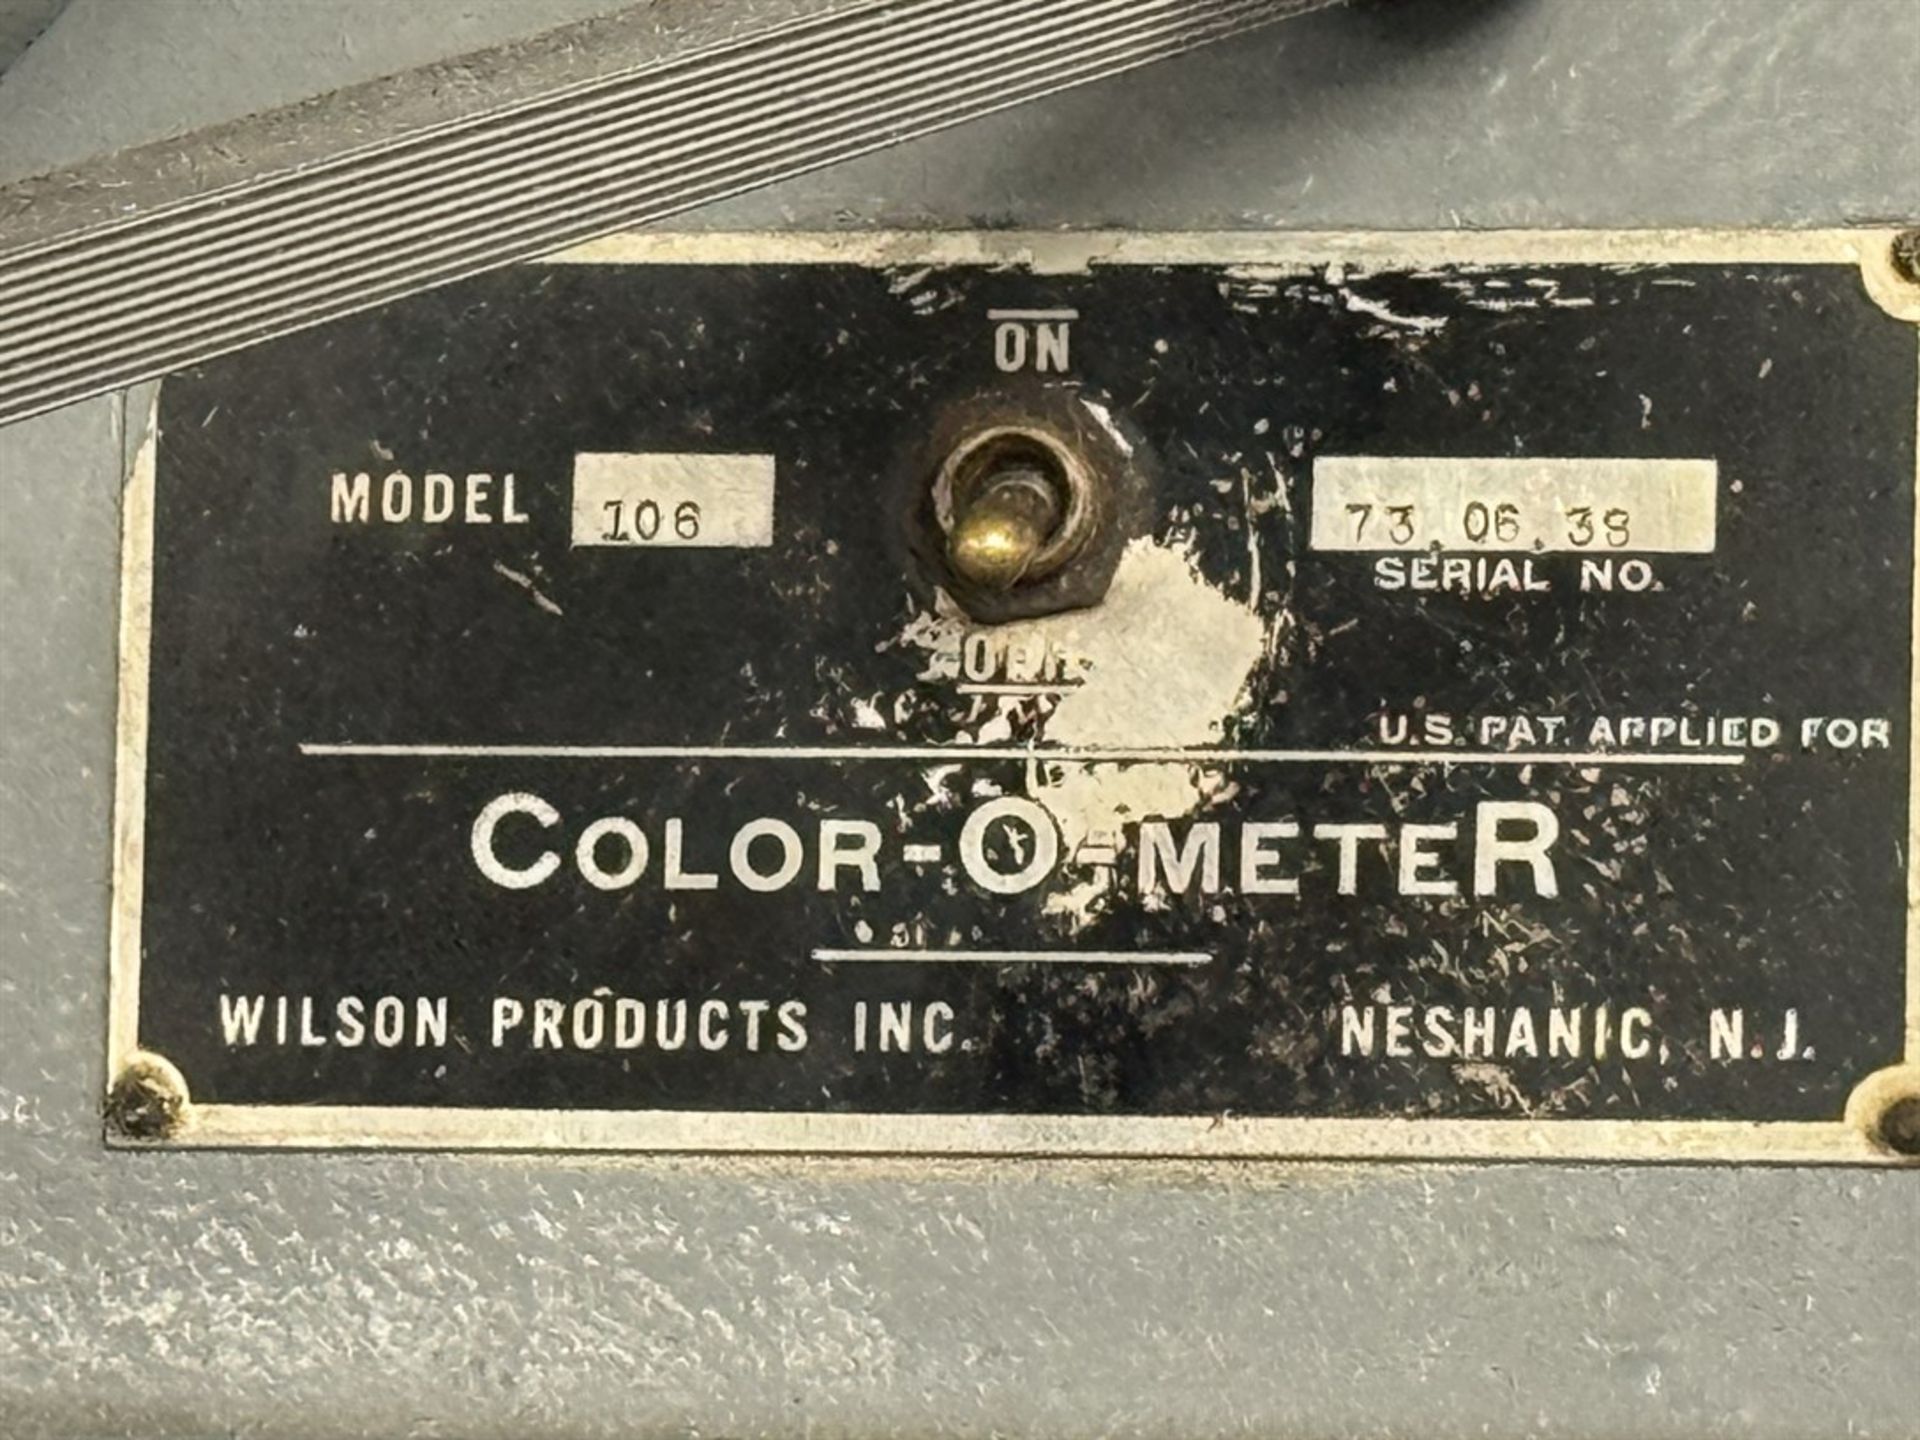 Insulation Extrusion Line (#2)-WILSON 106 Color Meter, s/n 73.06.38 - Image 3 of 3